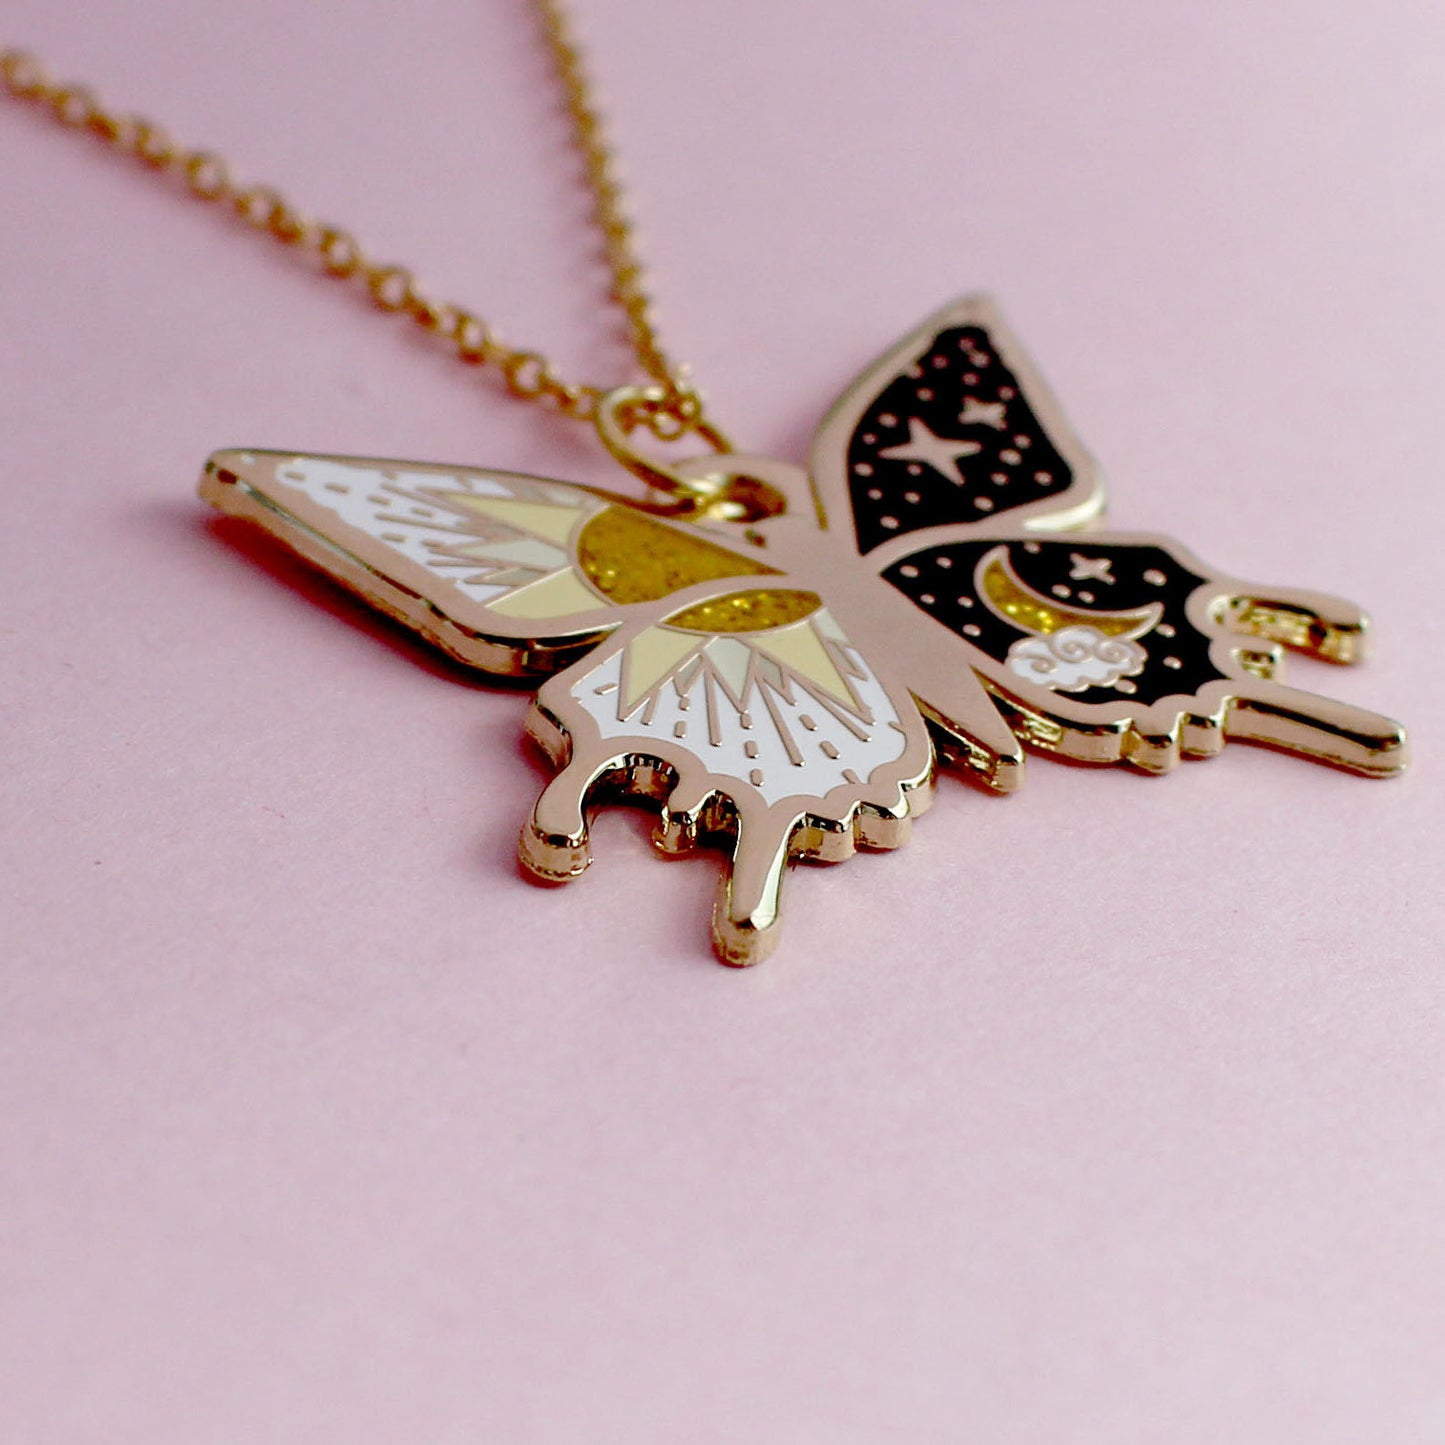 Yin and yang Butterfly Necklace